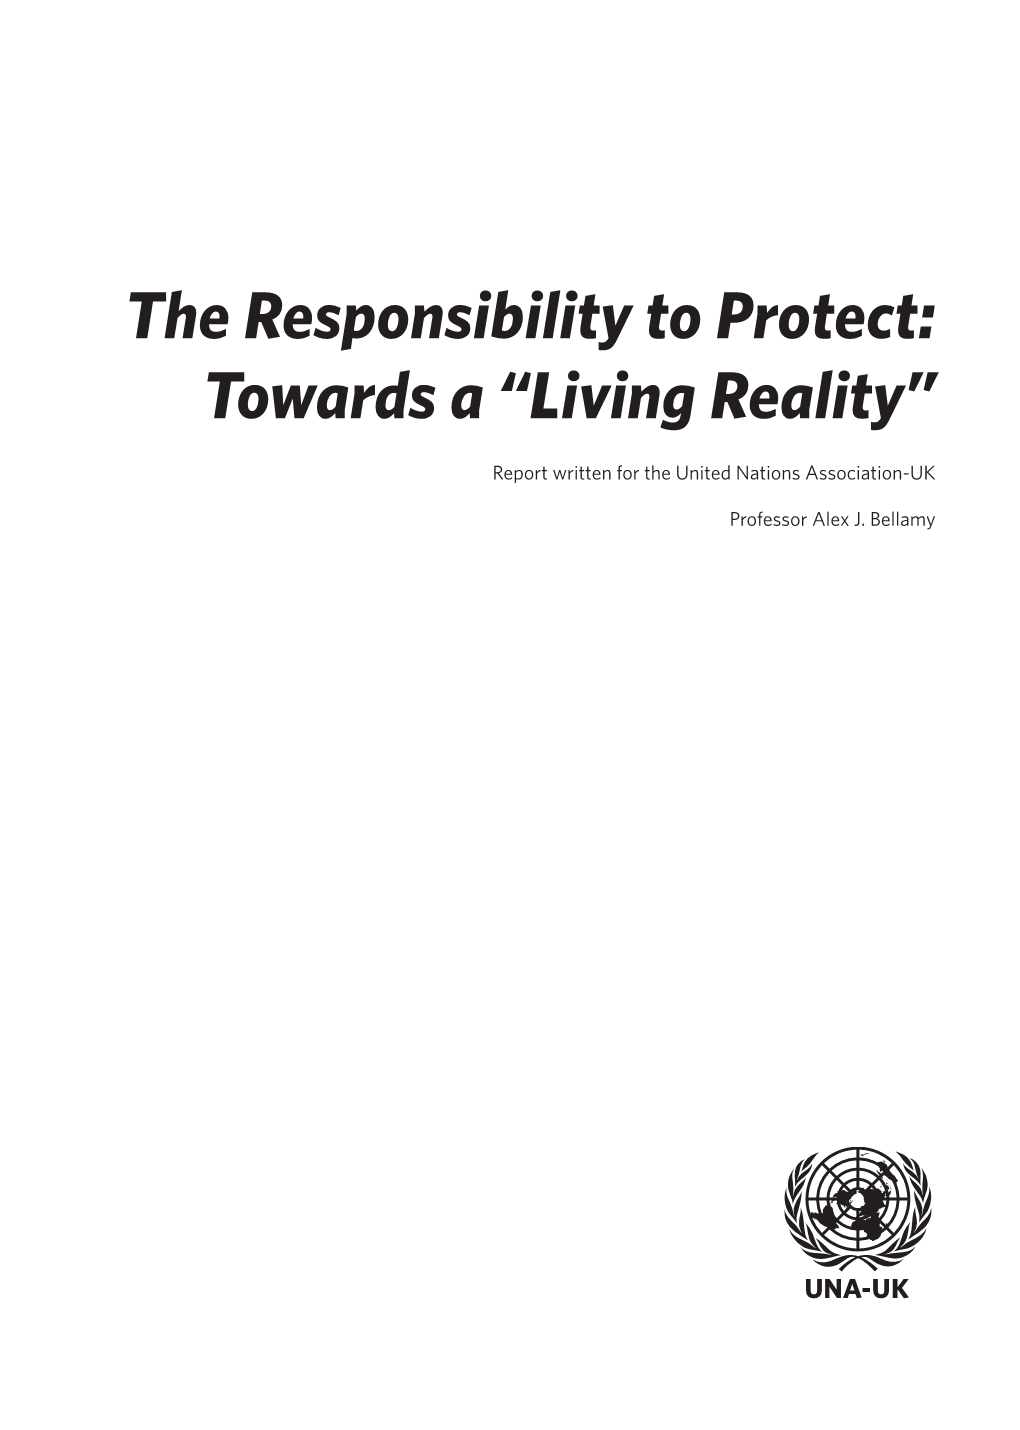 The Responsibility to Protect: Towards a “Living Reality”